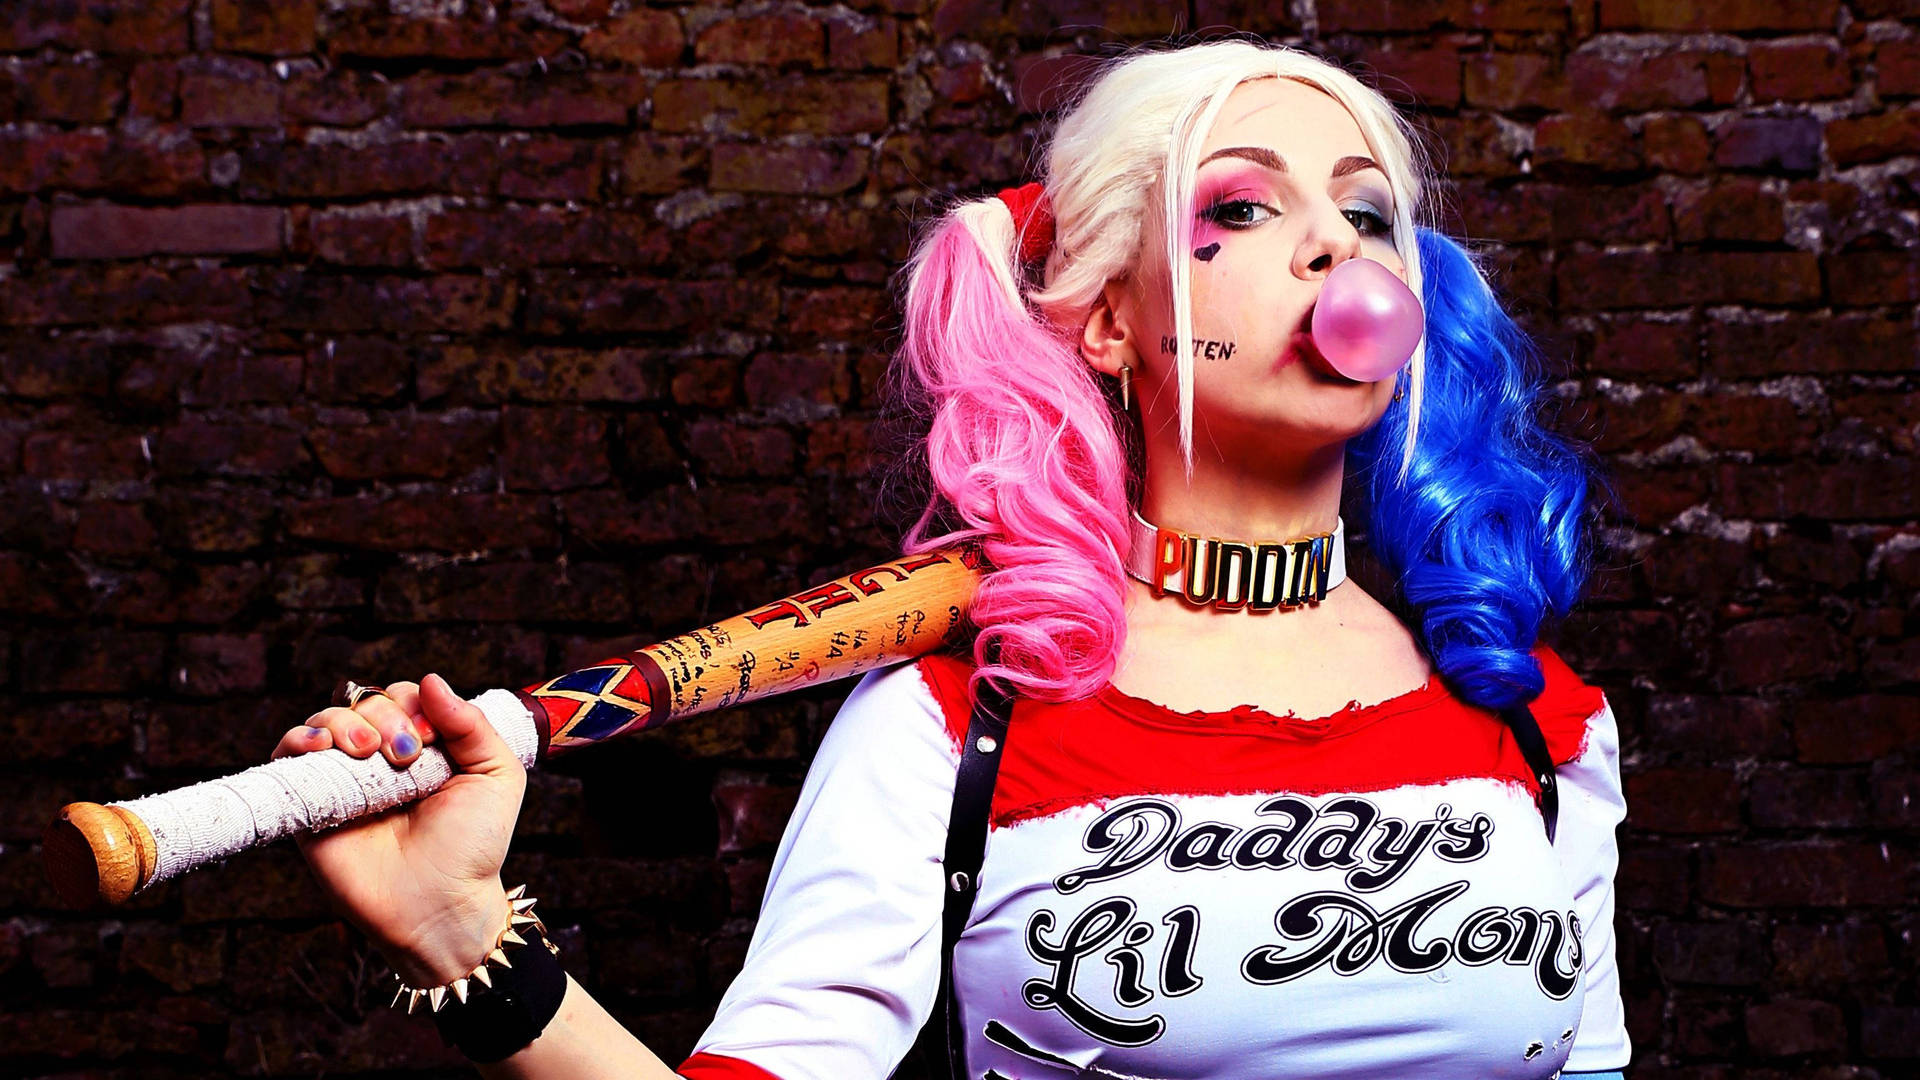 4k Harley Quinn From Suicide Squad Background